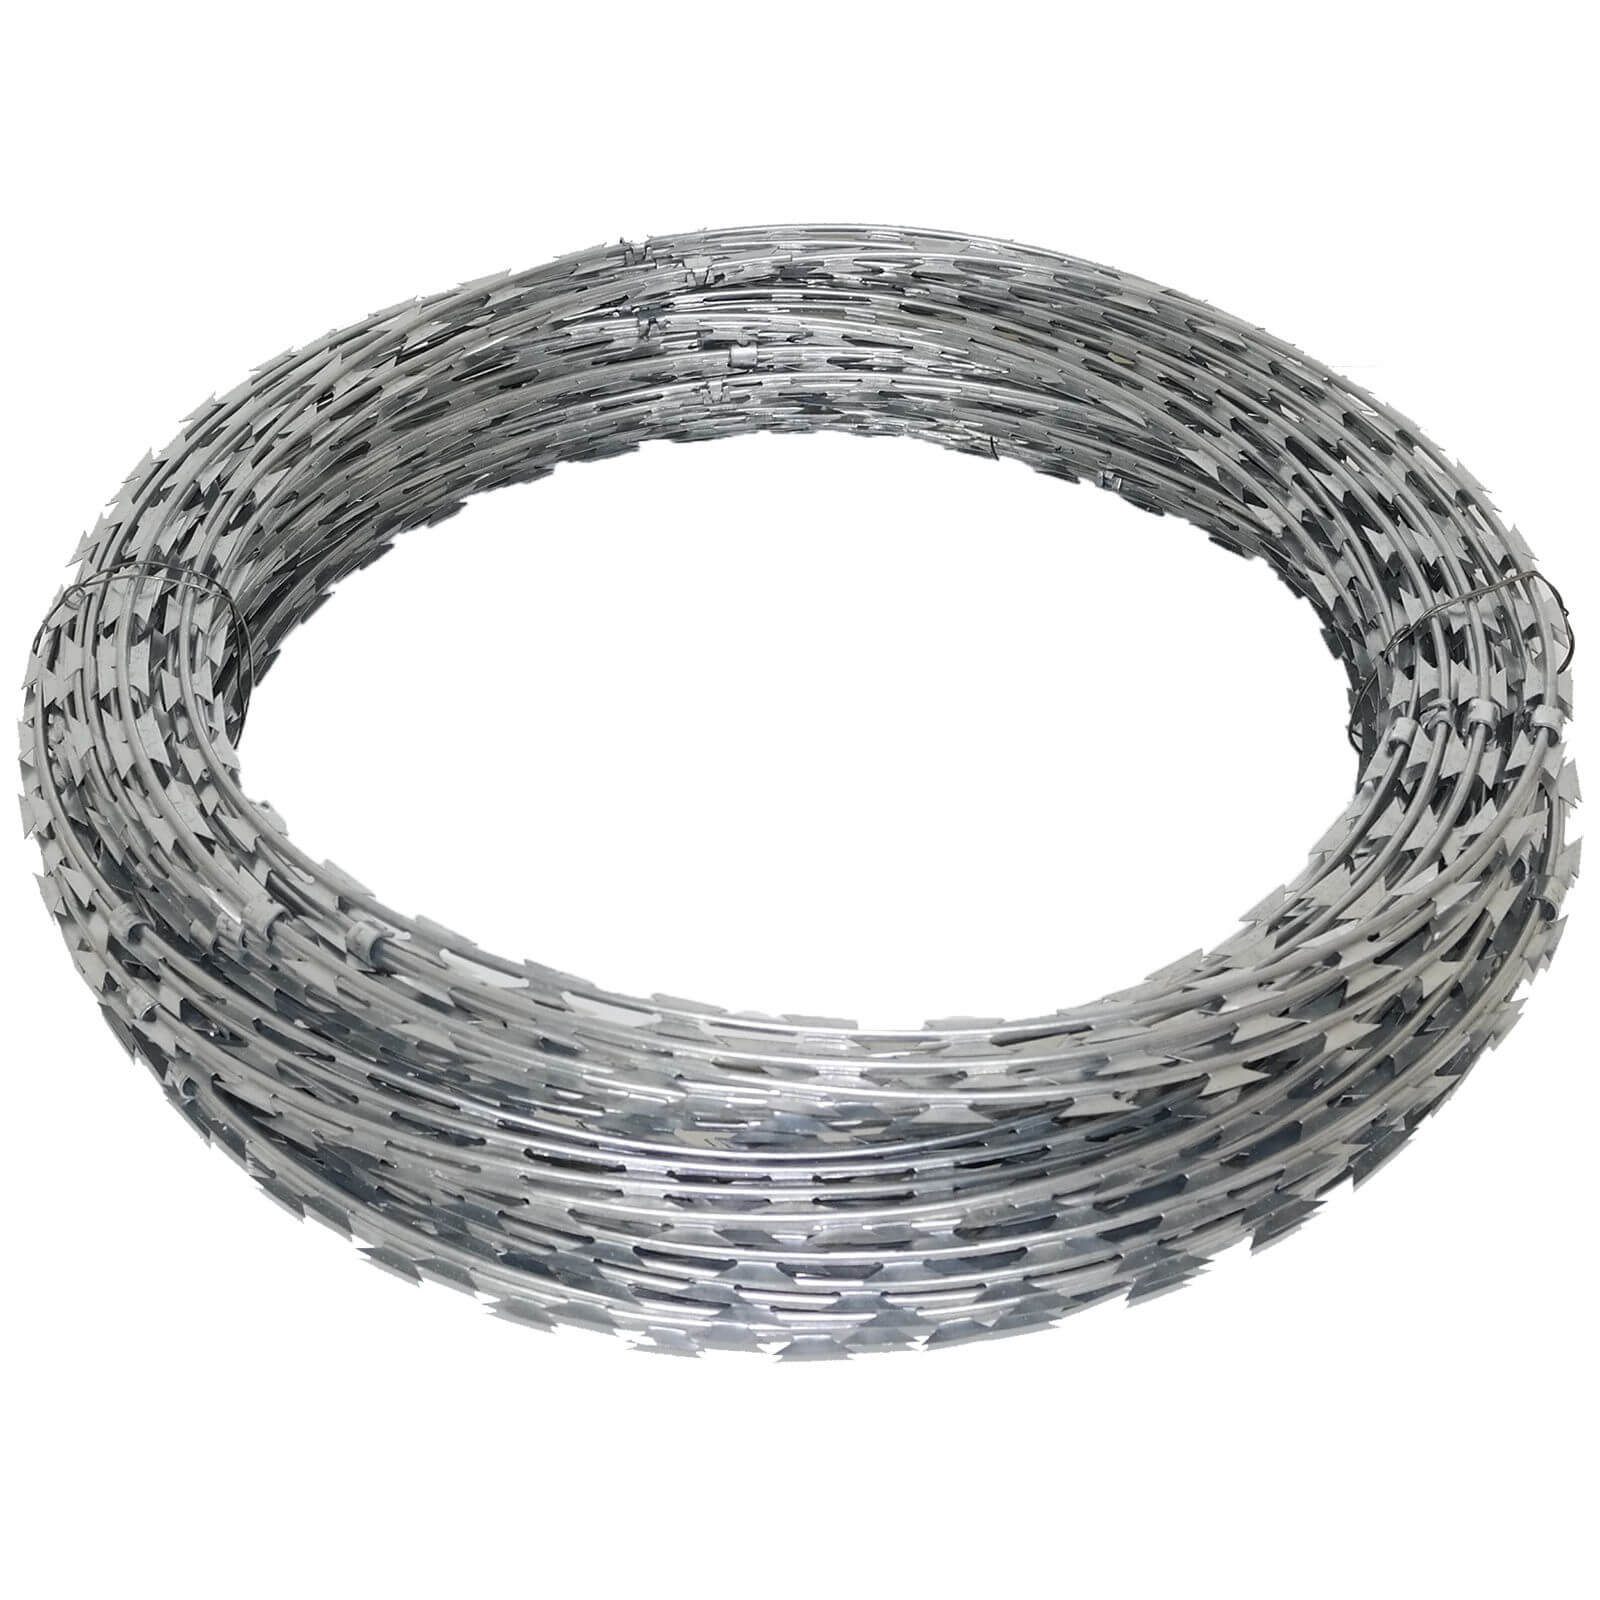 Razor wire fencing: Safeguarding Your Property with Advanced Wire Fence Systems